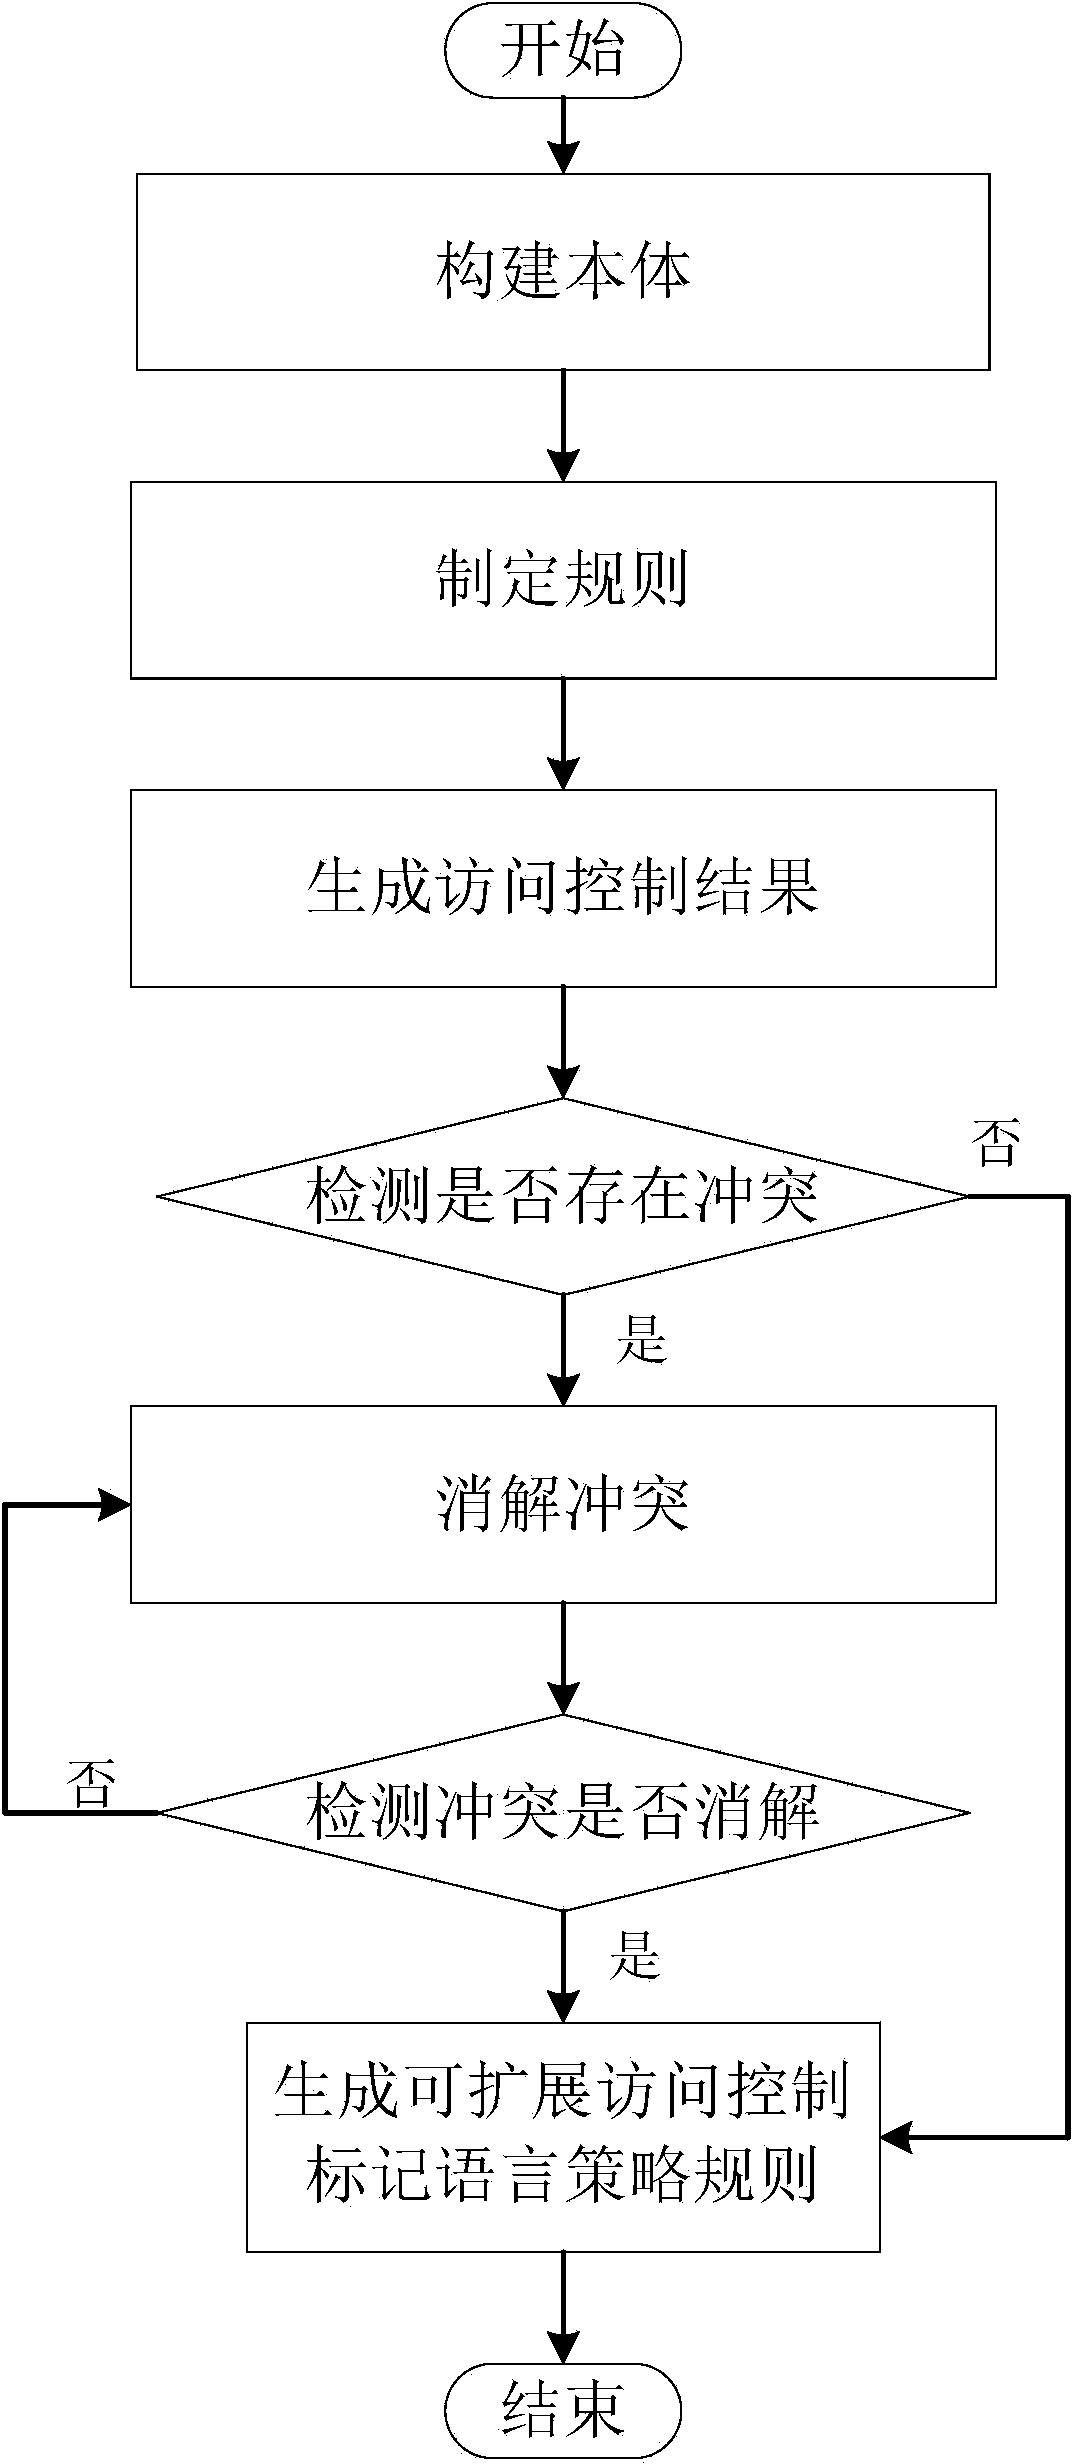 XACML frame extension system and method for network access control system